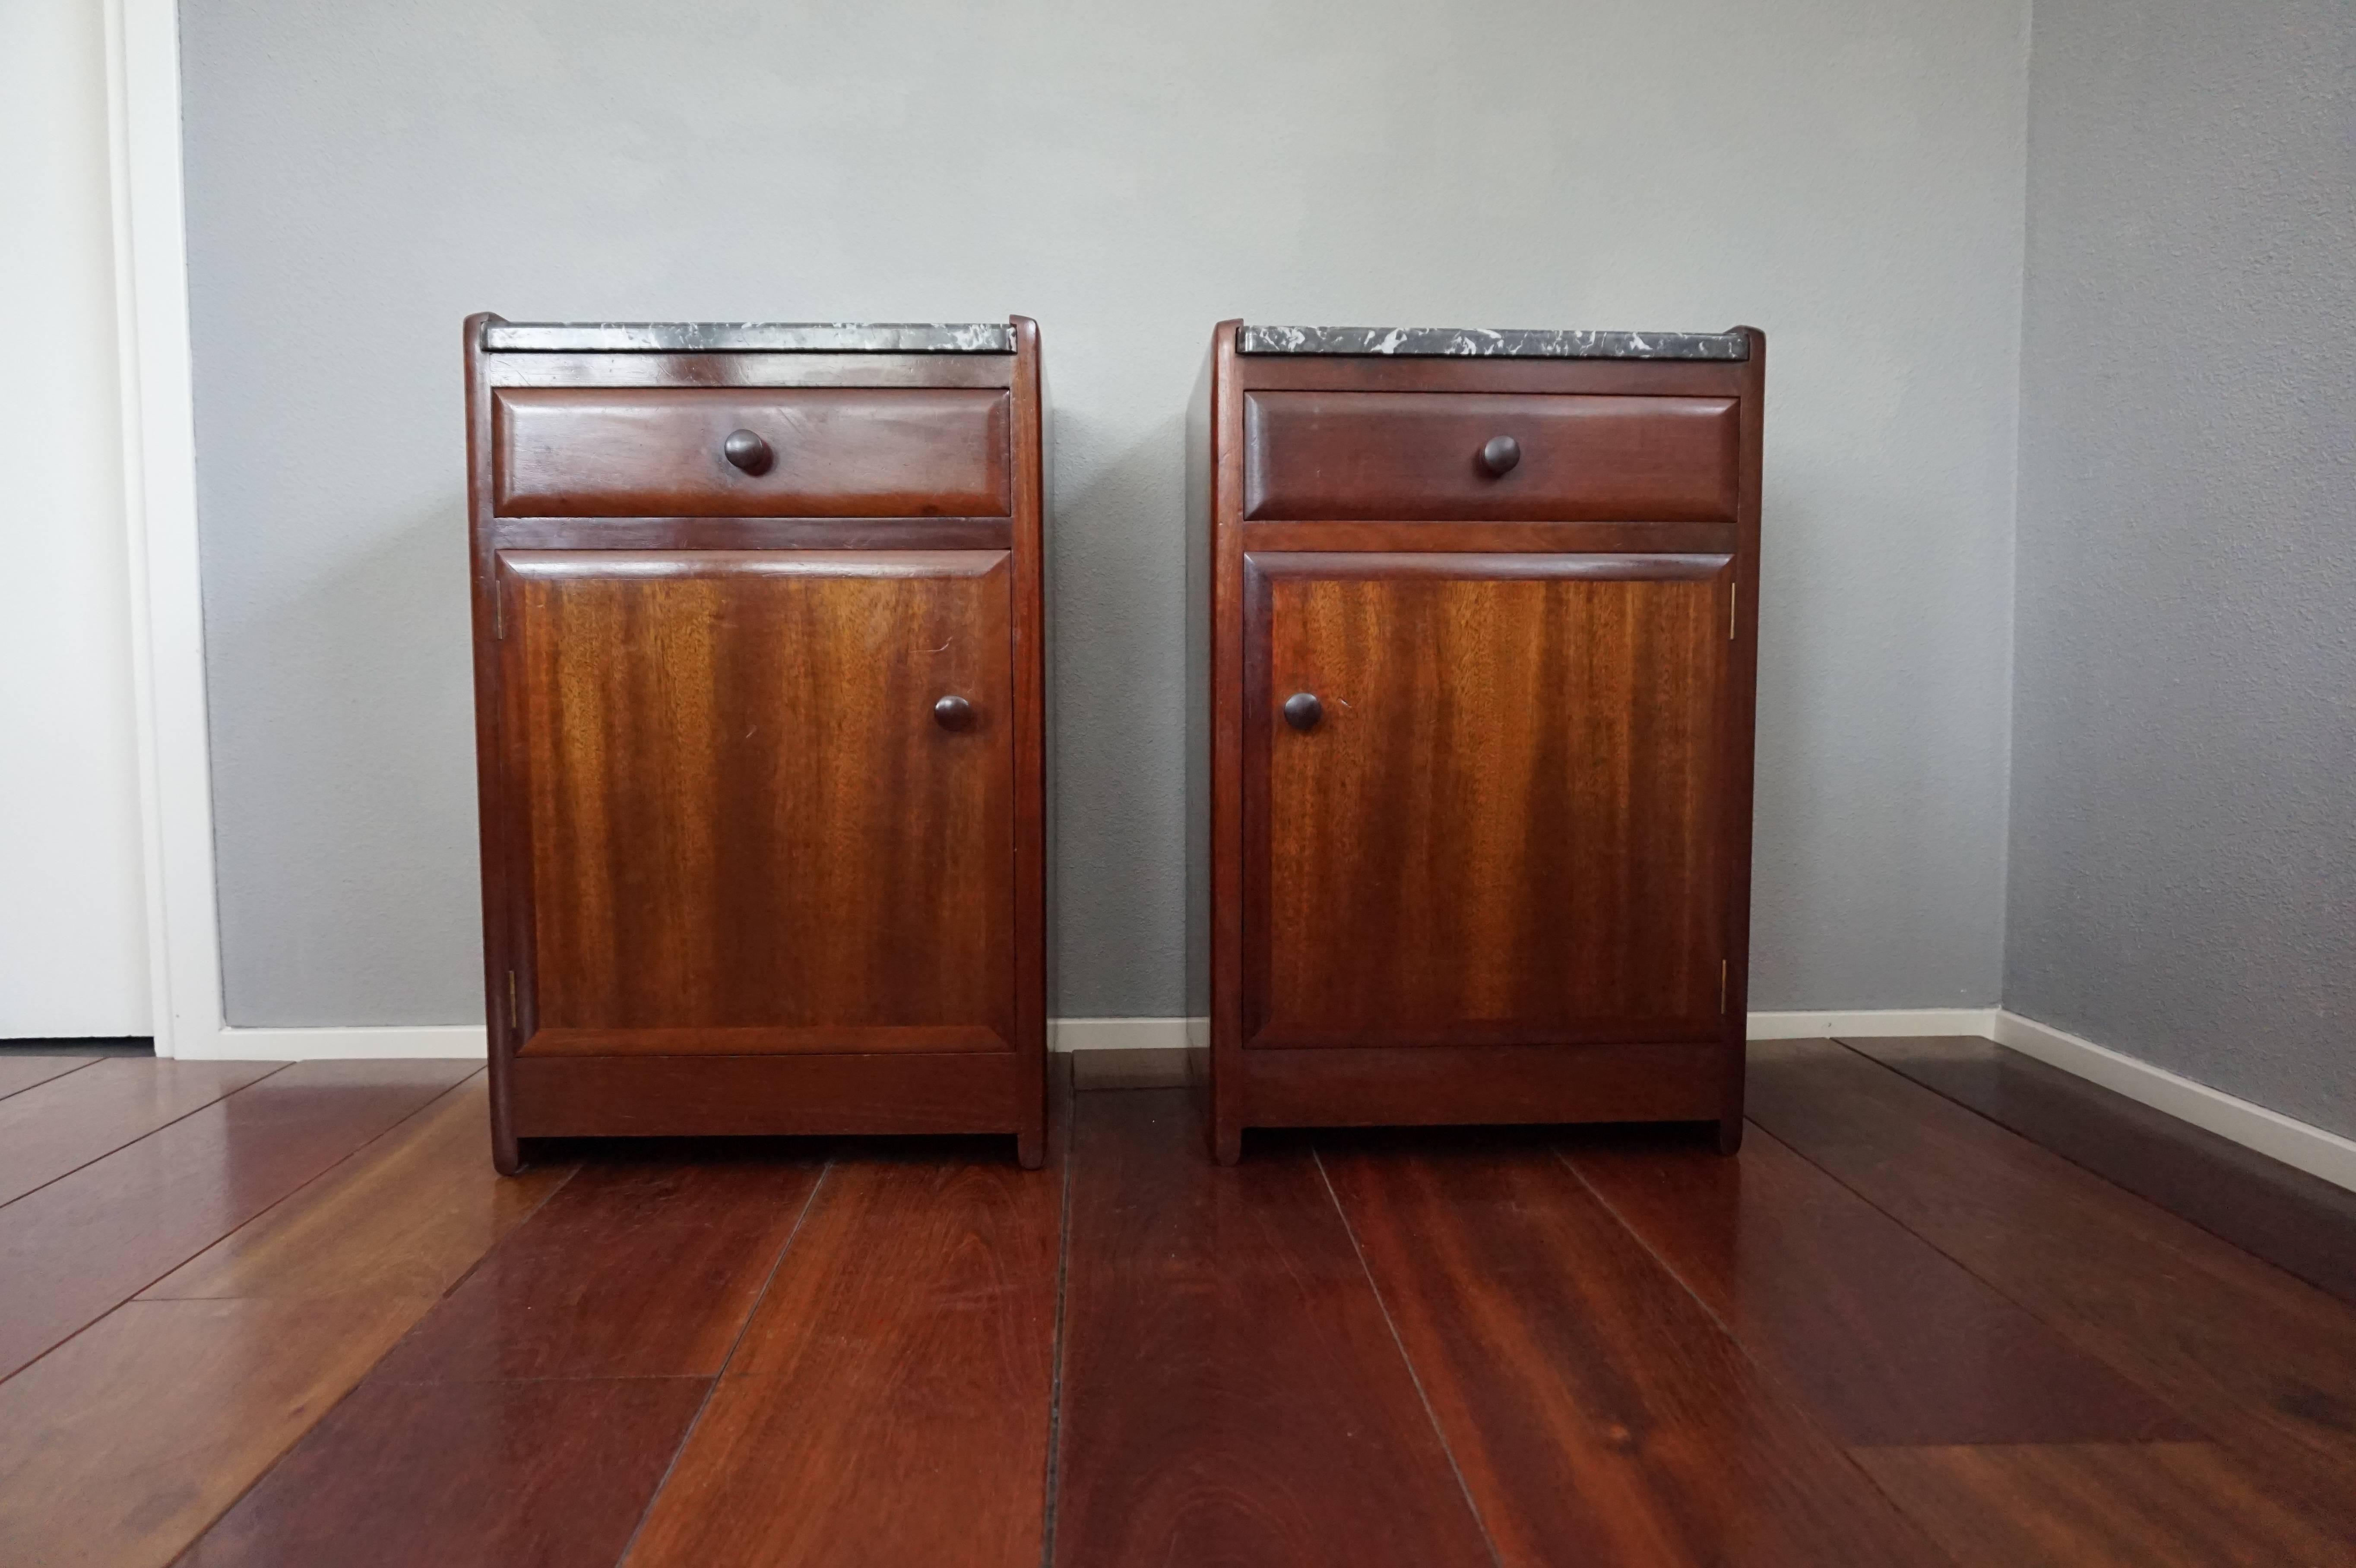 Top quality and great condition bedside cabinets by one of Holland's finest.

These beautifully designed and skillfully handcrafted night stands date from the 1920s. They were made by Meubelfabriek Nederland in Groningen (Holland) owned by J.A.